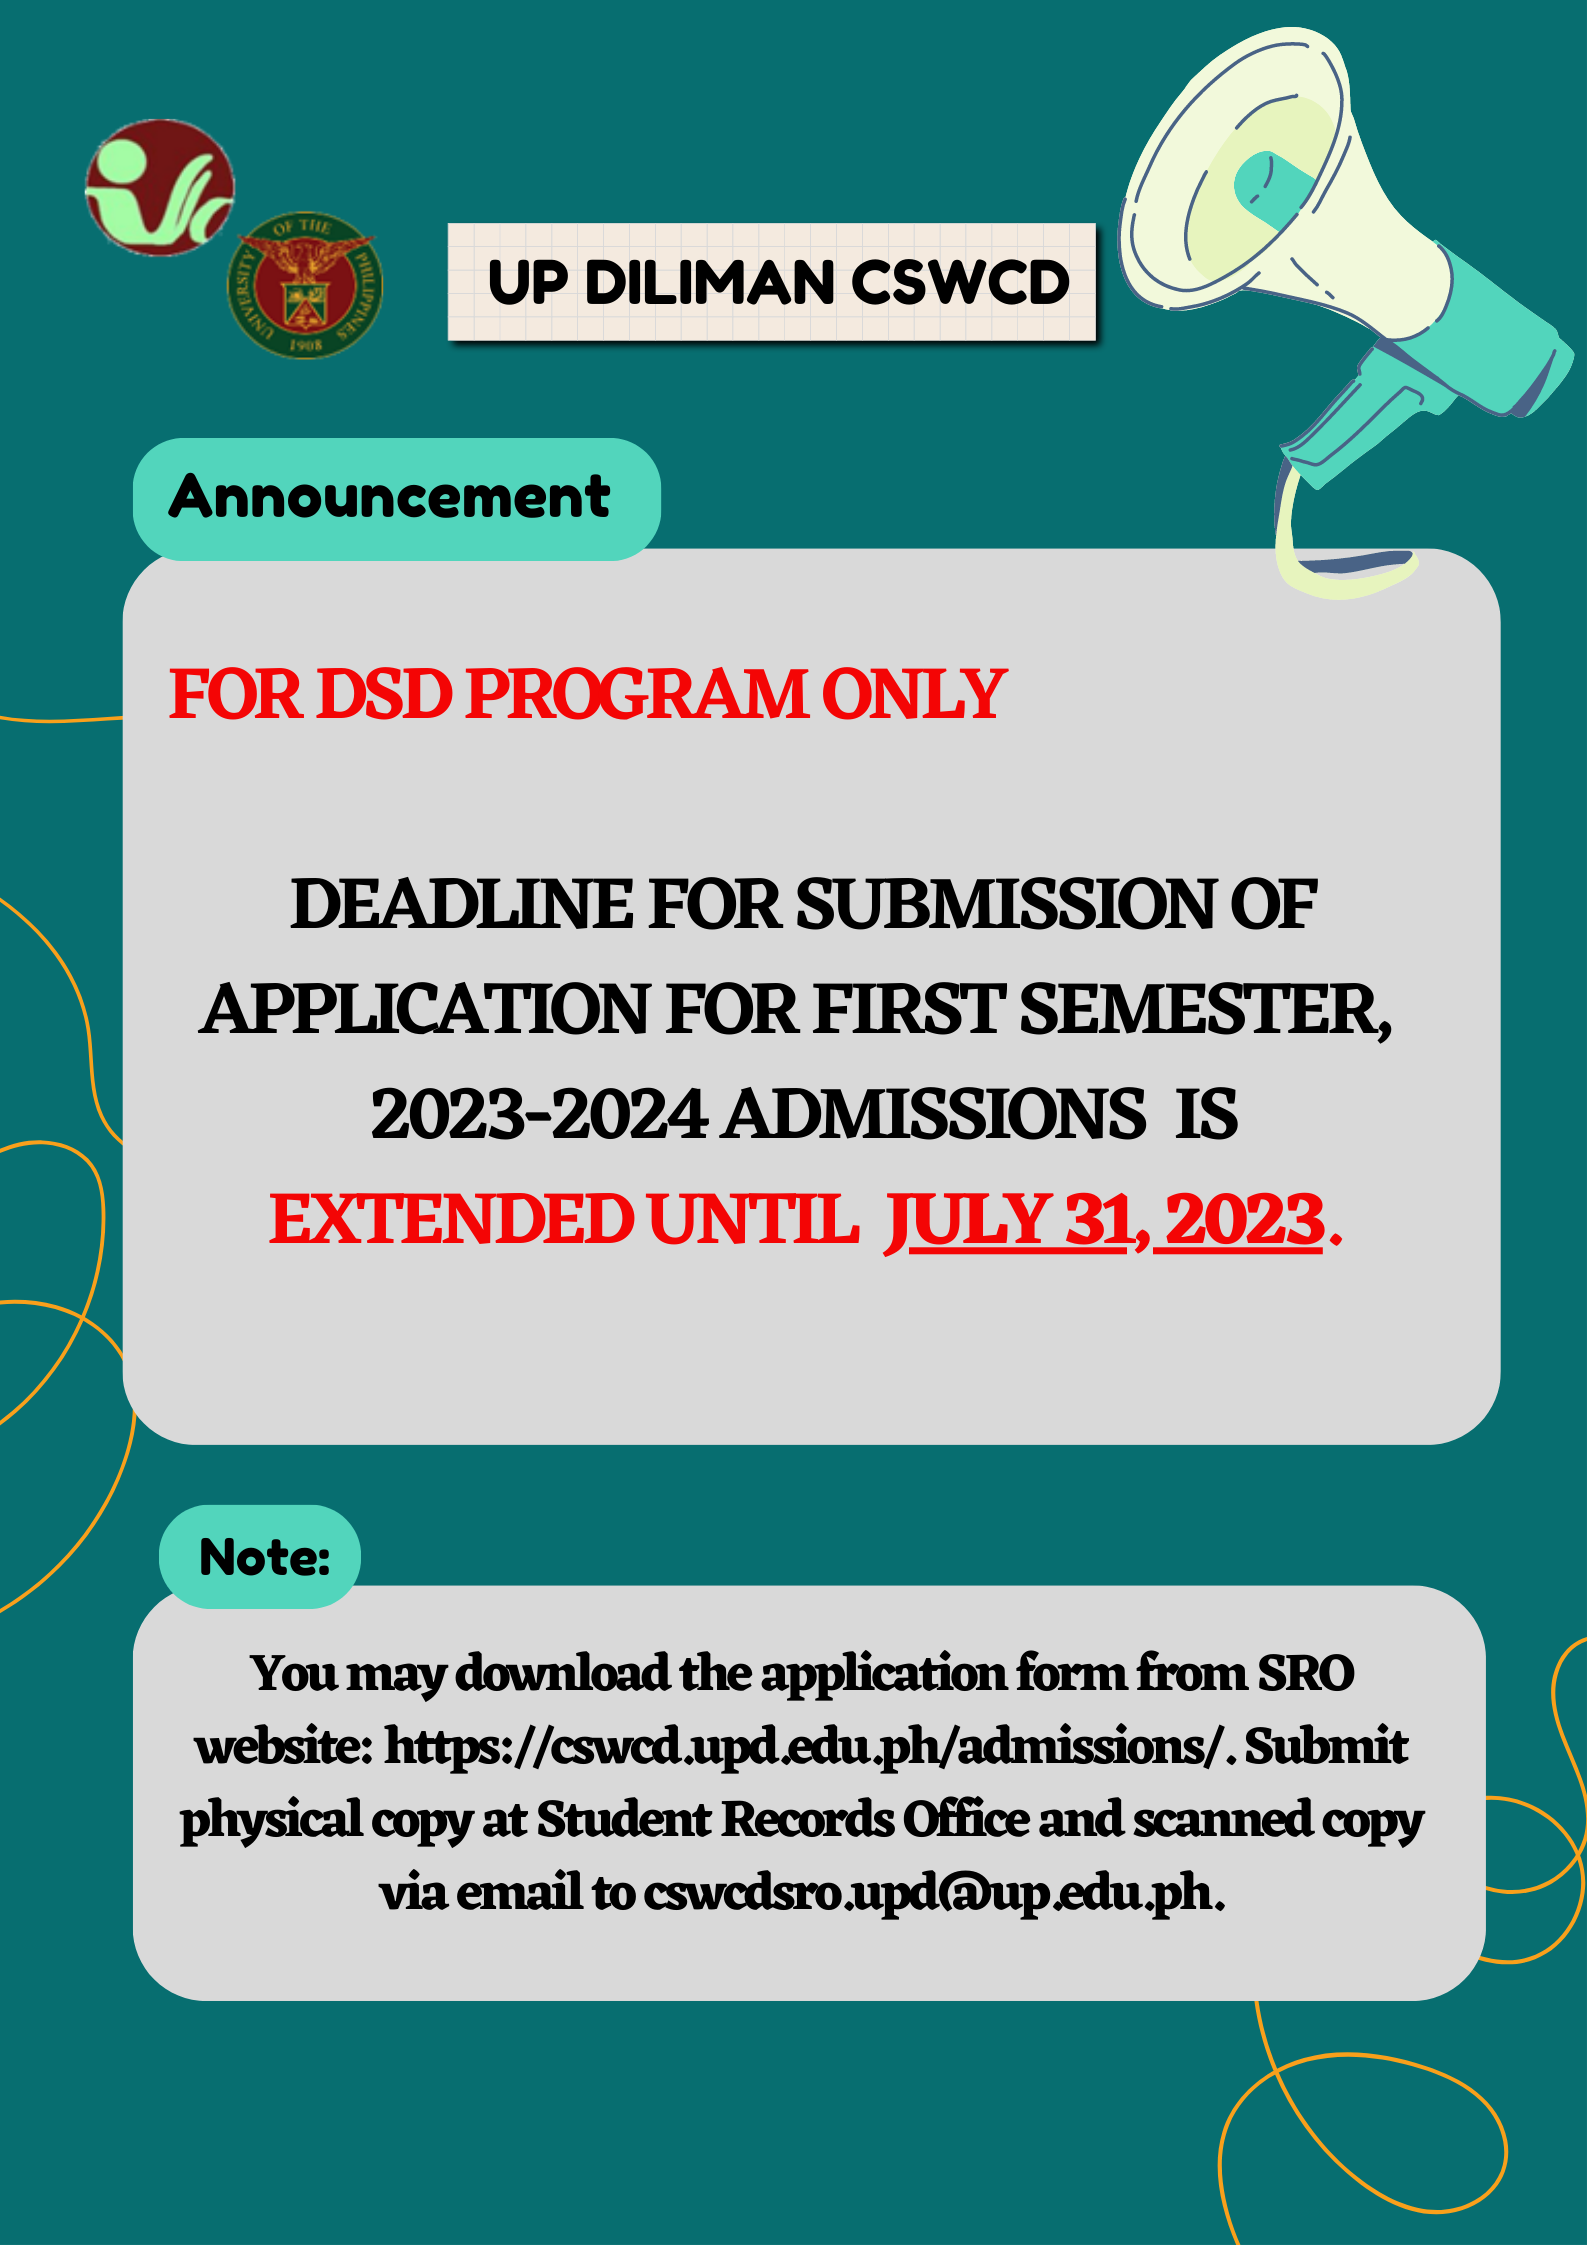 FOR DSD ONLY – Deadline for Submission of Application for First Semester, AY 2023-2024 Admissions is EXTENDED until JULY 31, 2023.